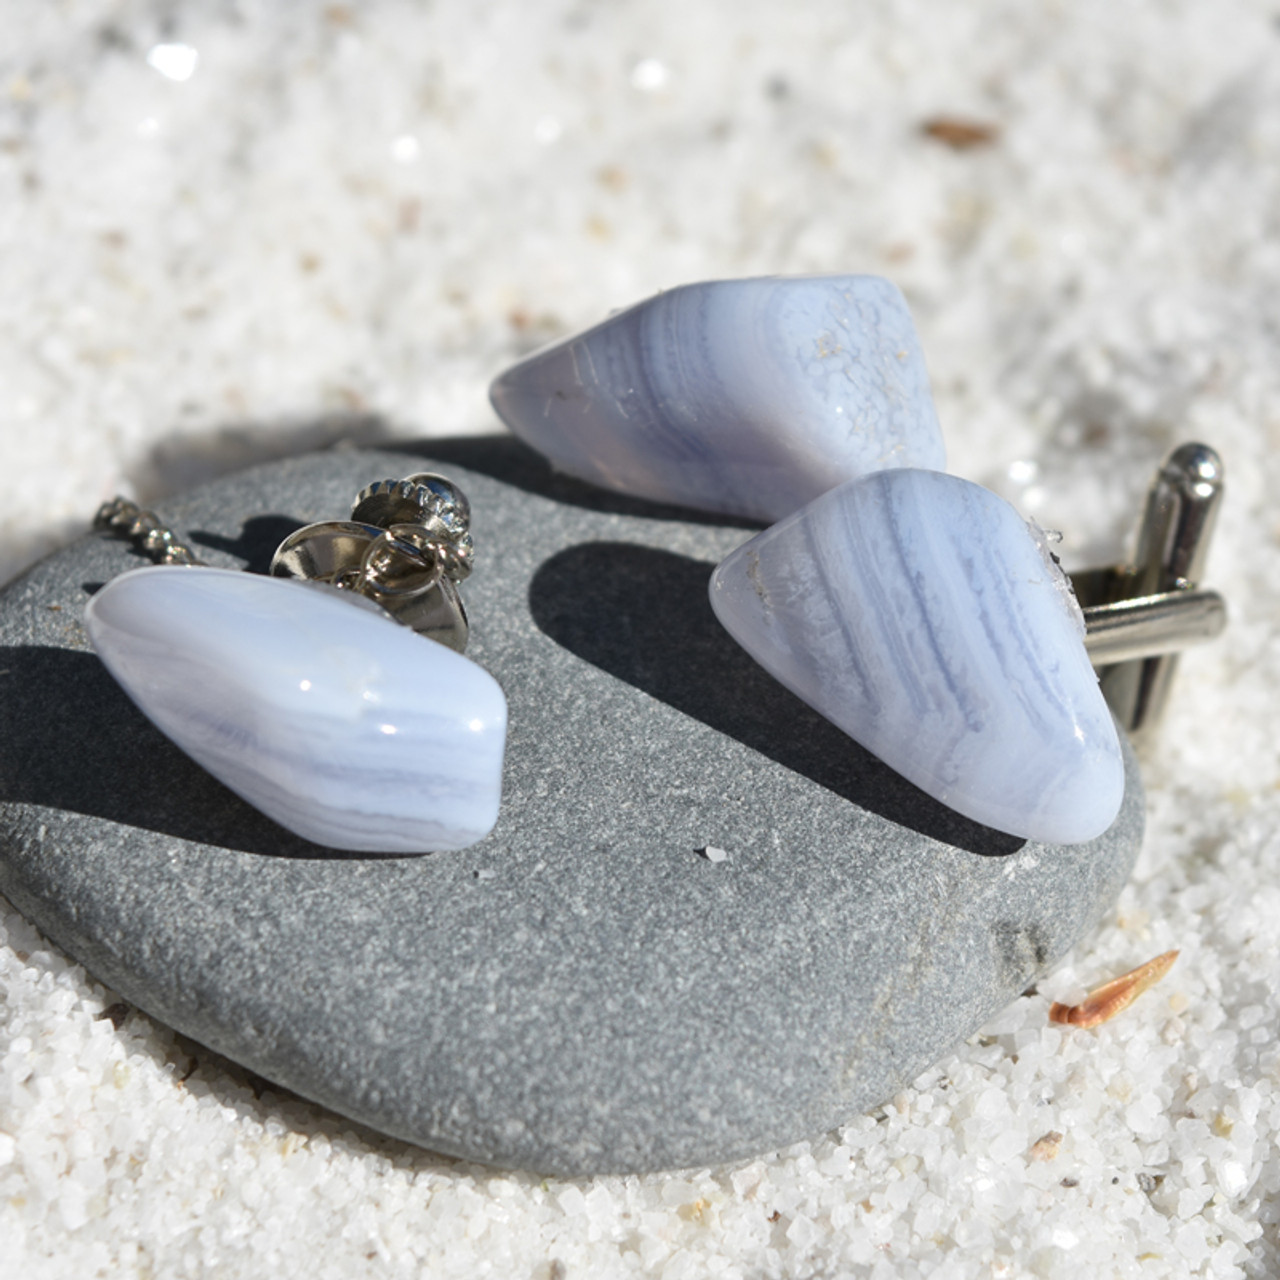 Blue Lace Agate Stone Cufflinks and Tie Tack Set